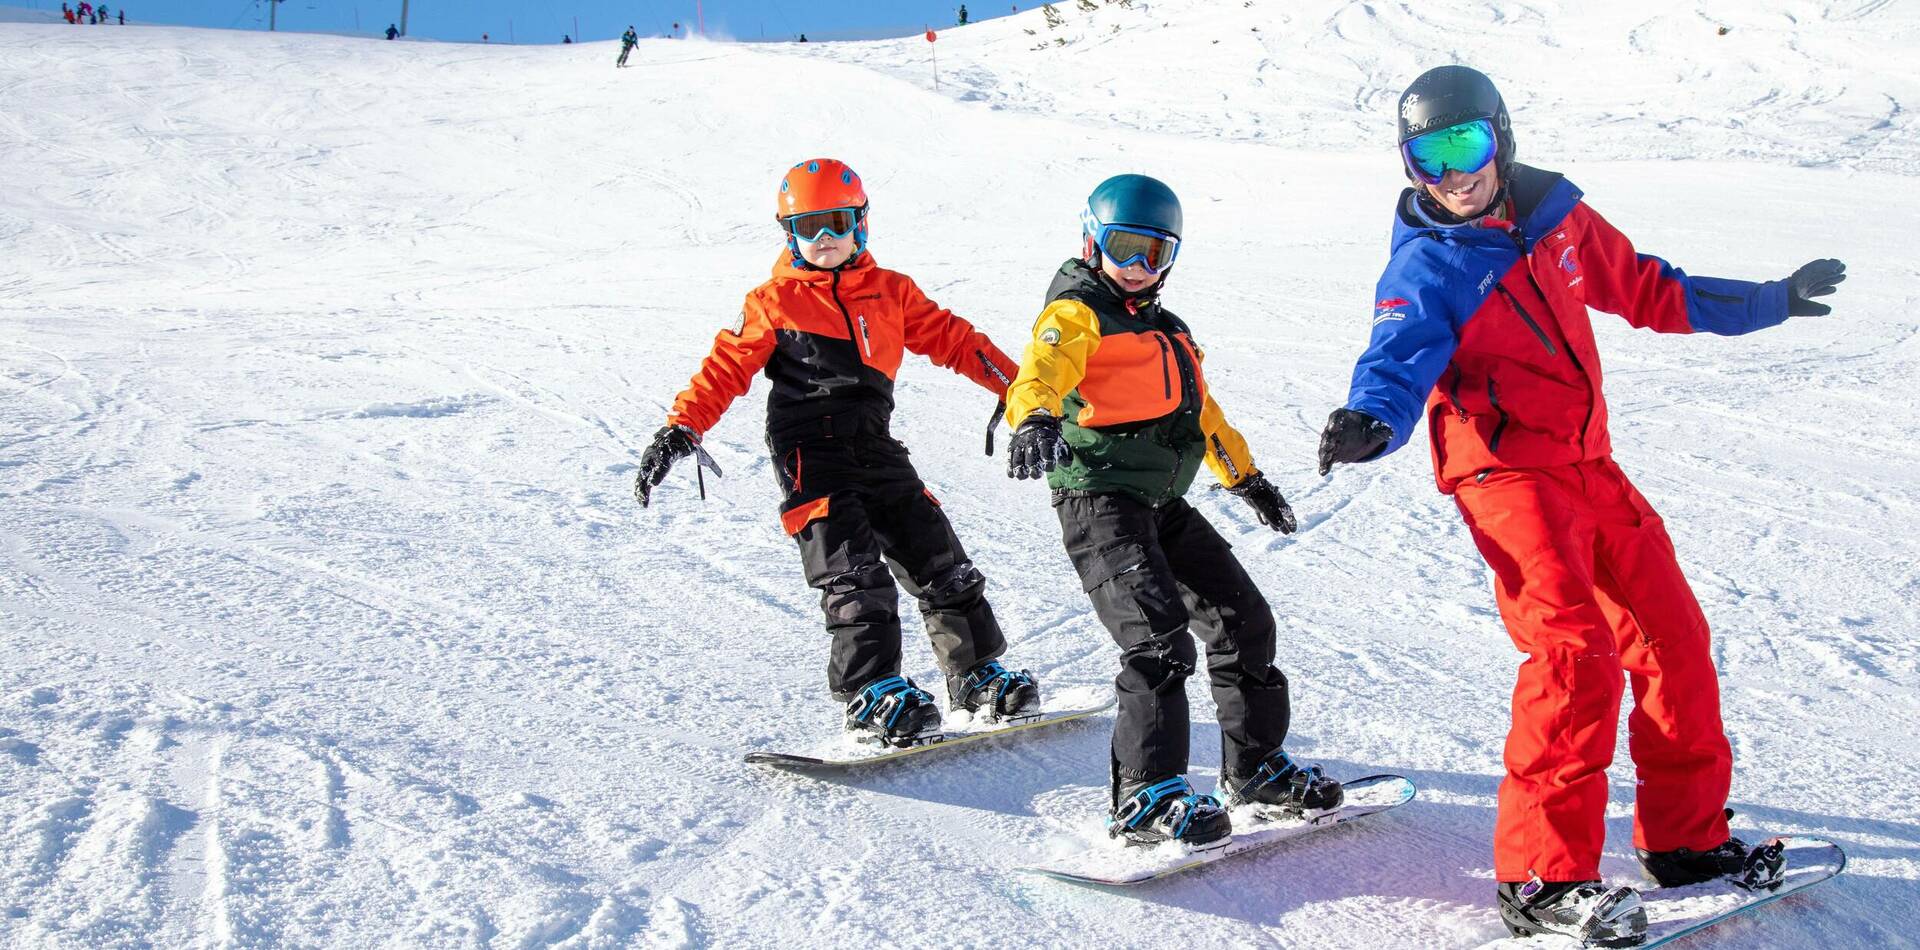 Snowboarding 
for Adults and Children from the age of 8 